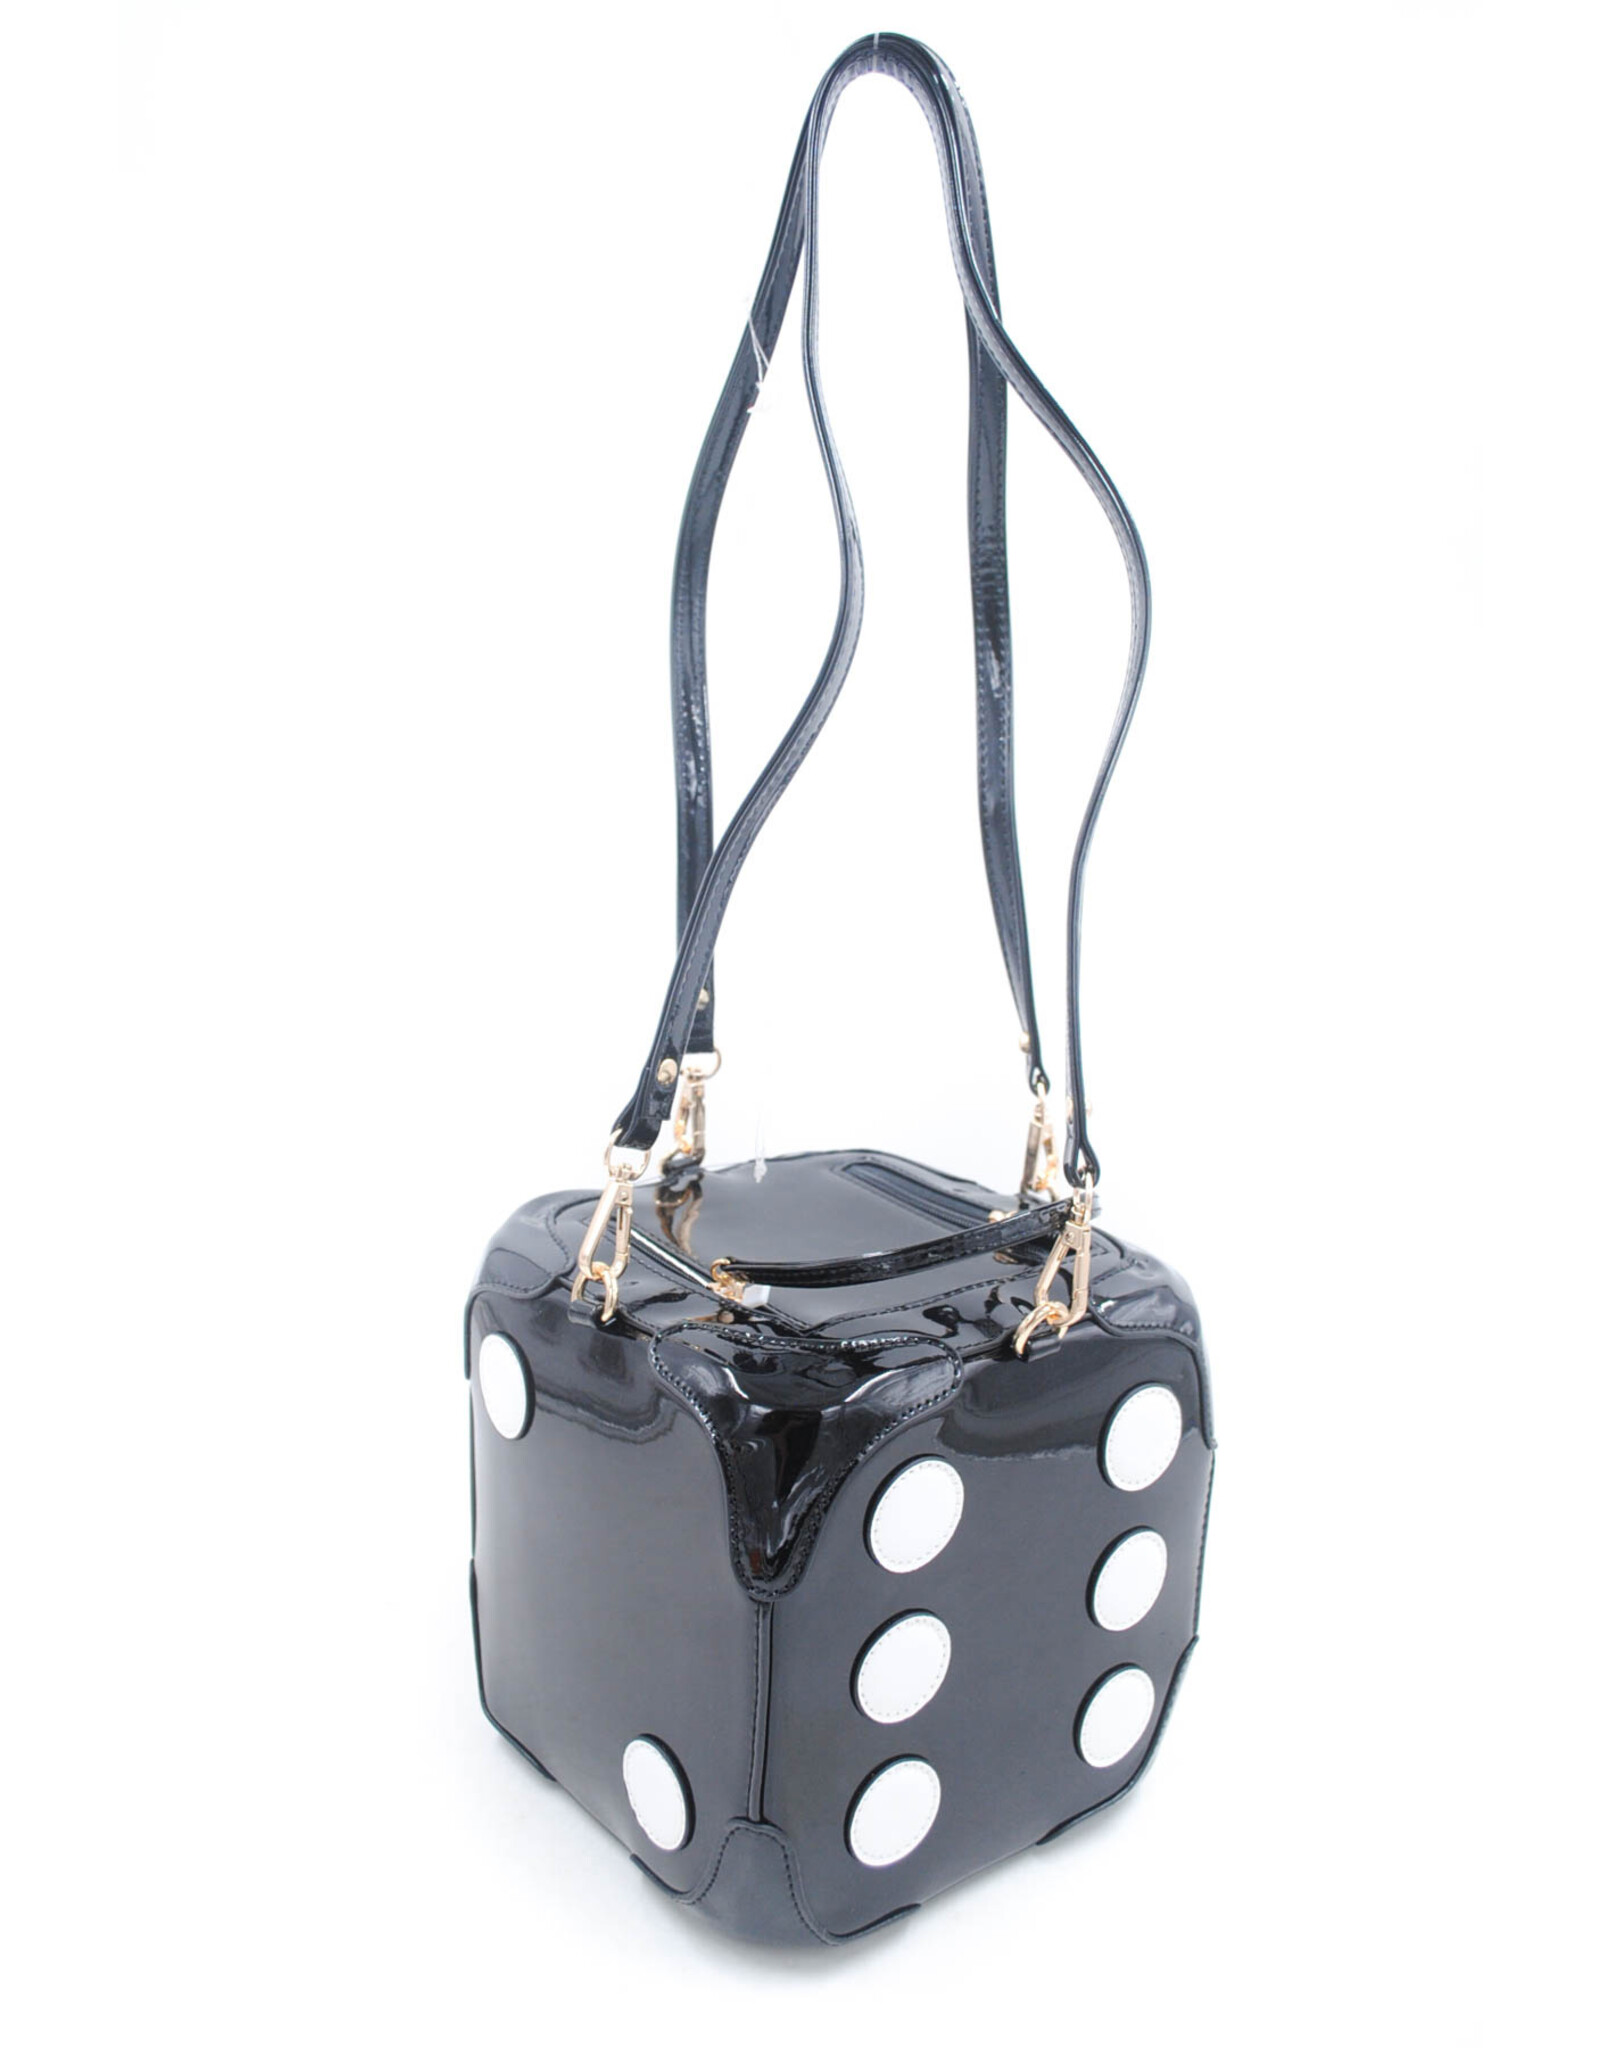 Systyle Fantasy bags - Fantasy bag Dice Black-White